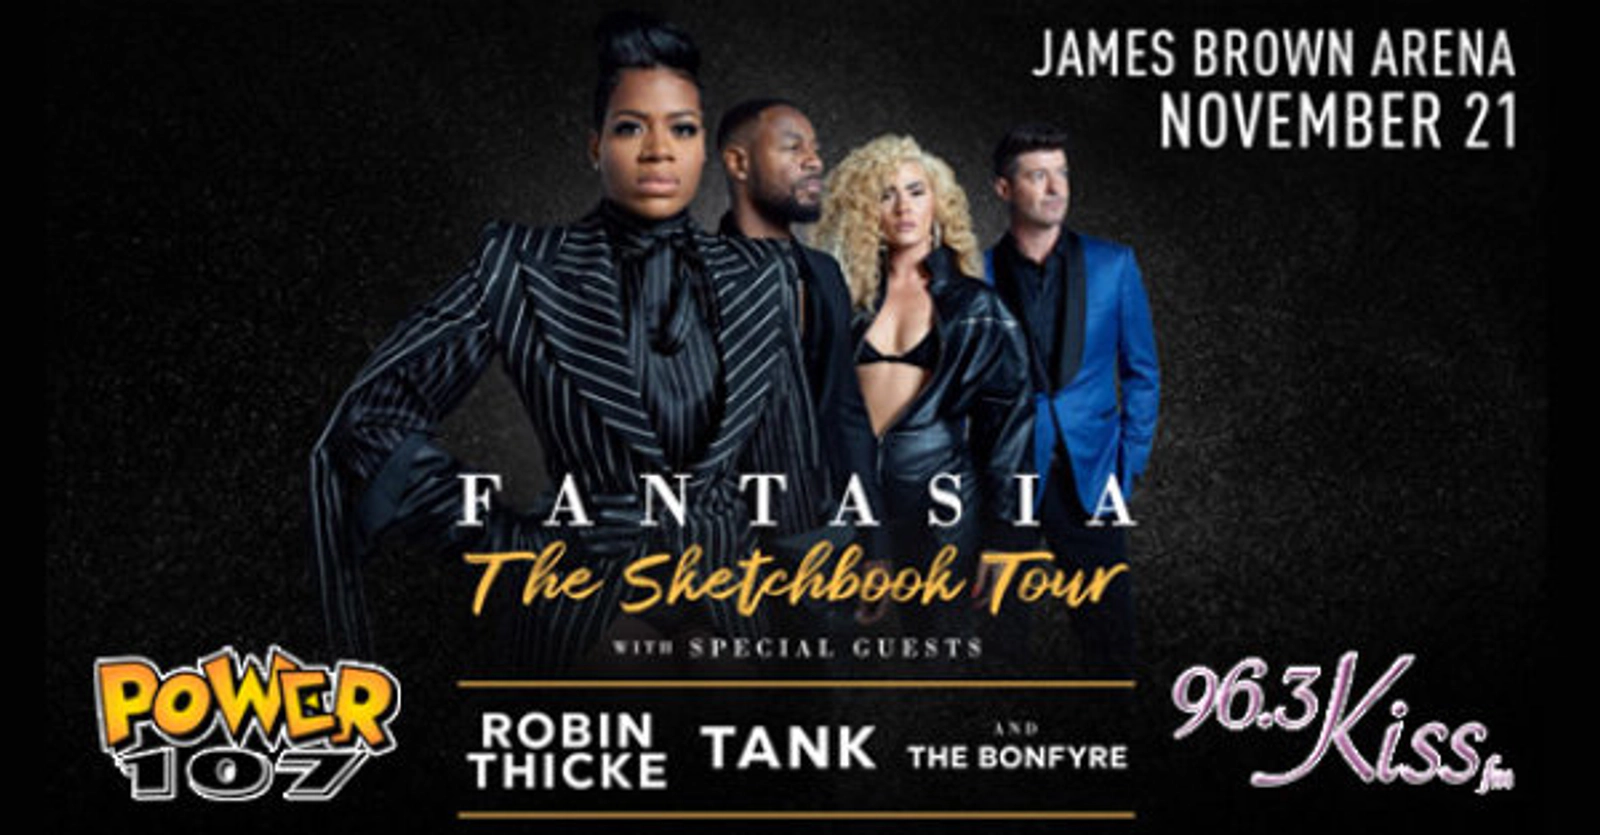 See Fantasia & Friends at the James Brown Arena on 11/21! - Thumbnail Image